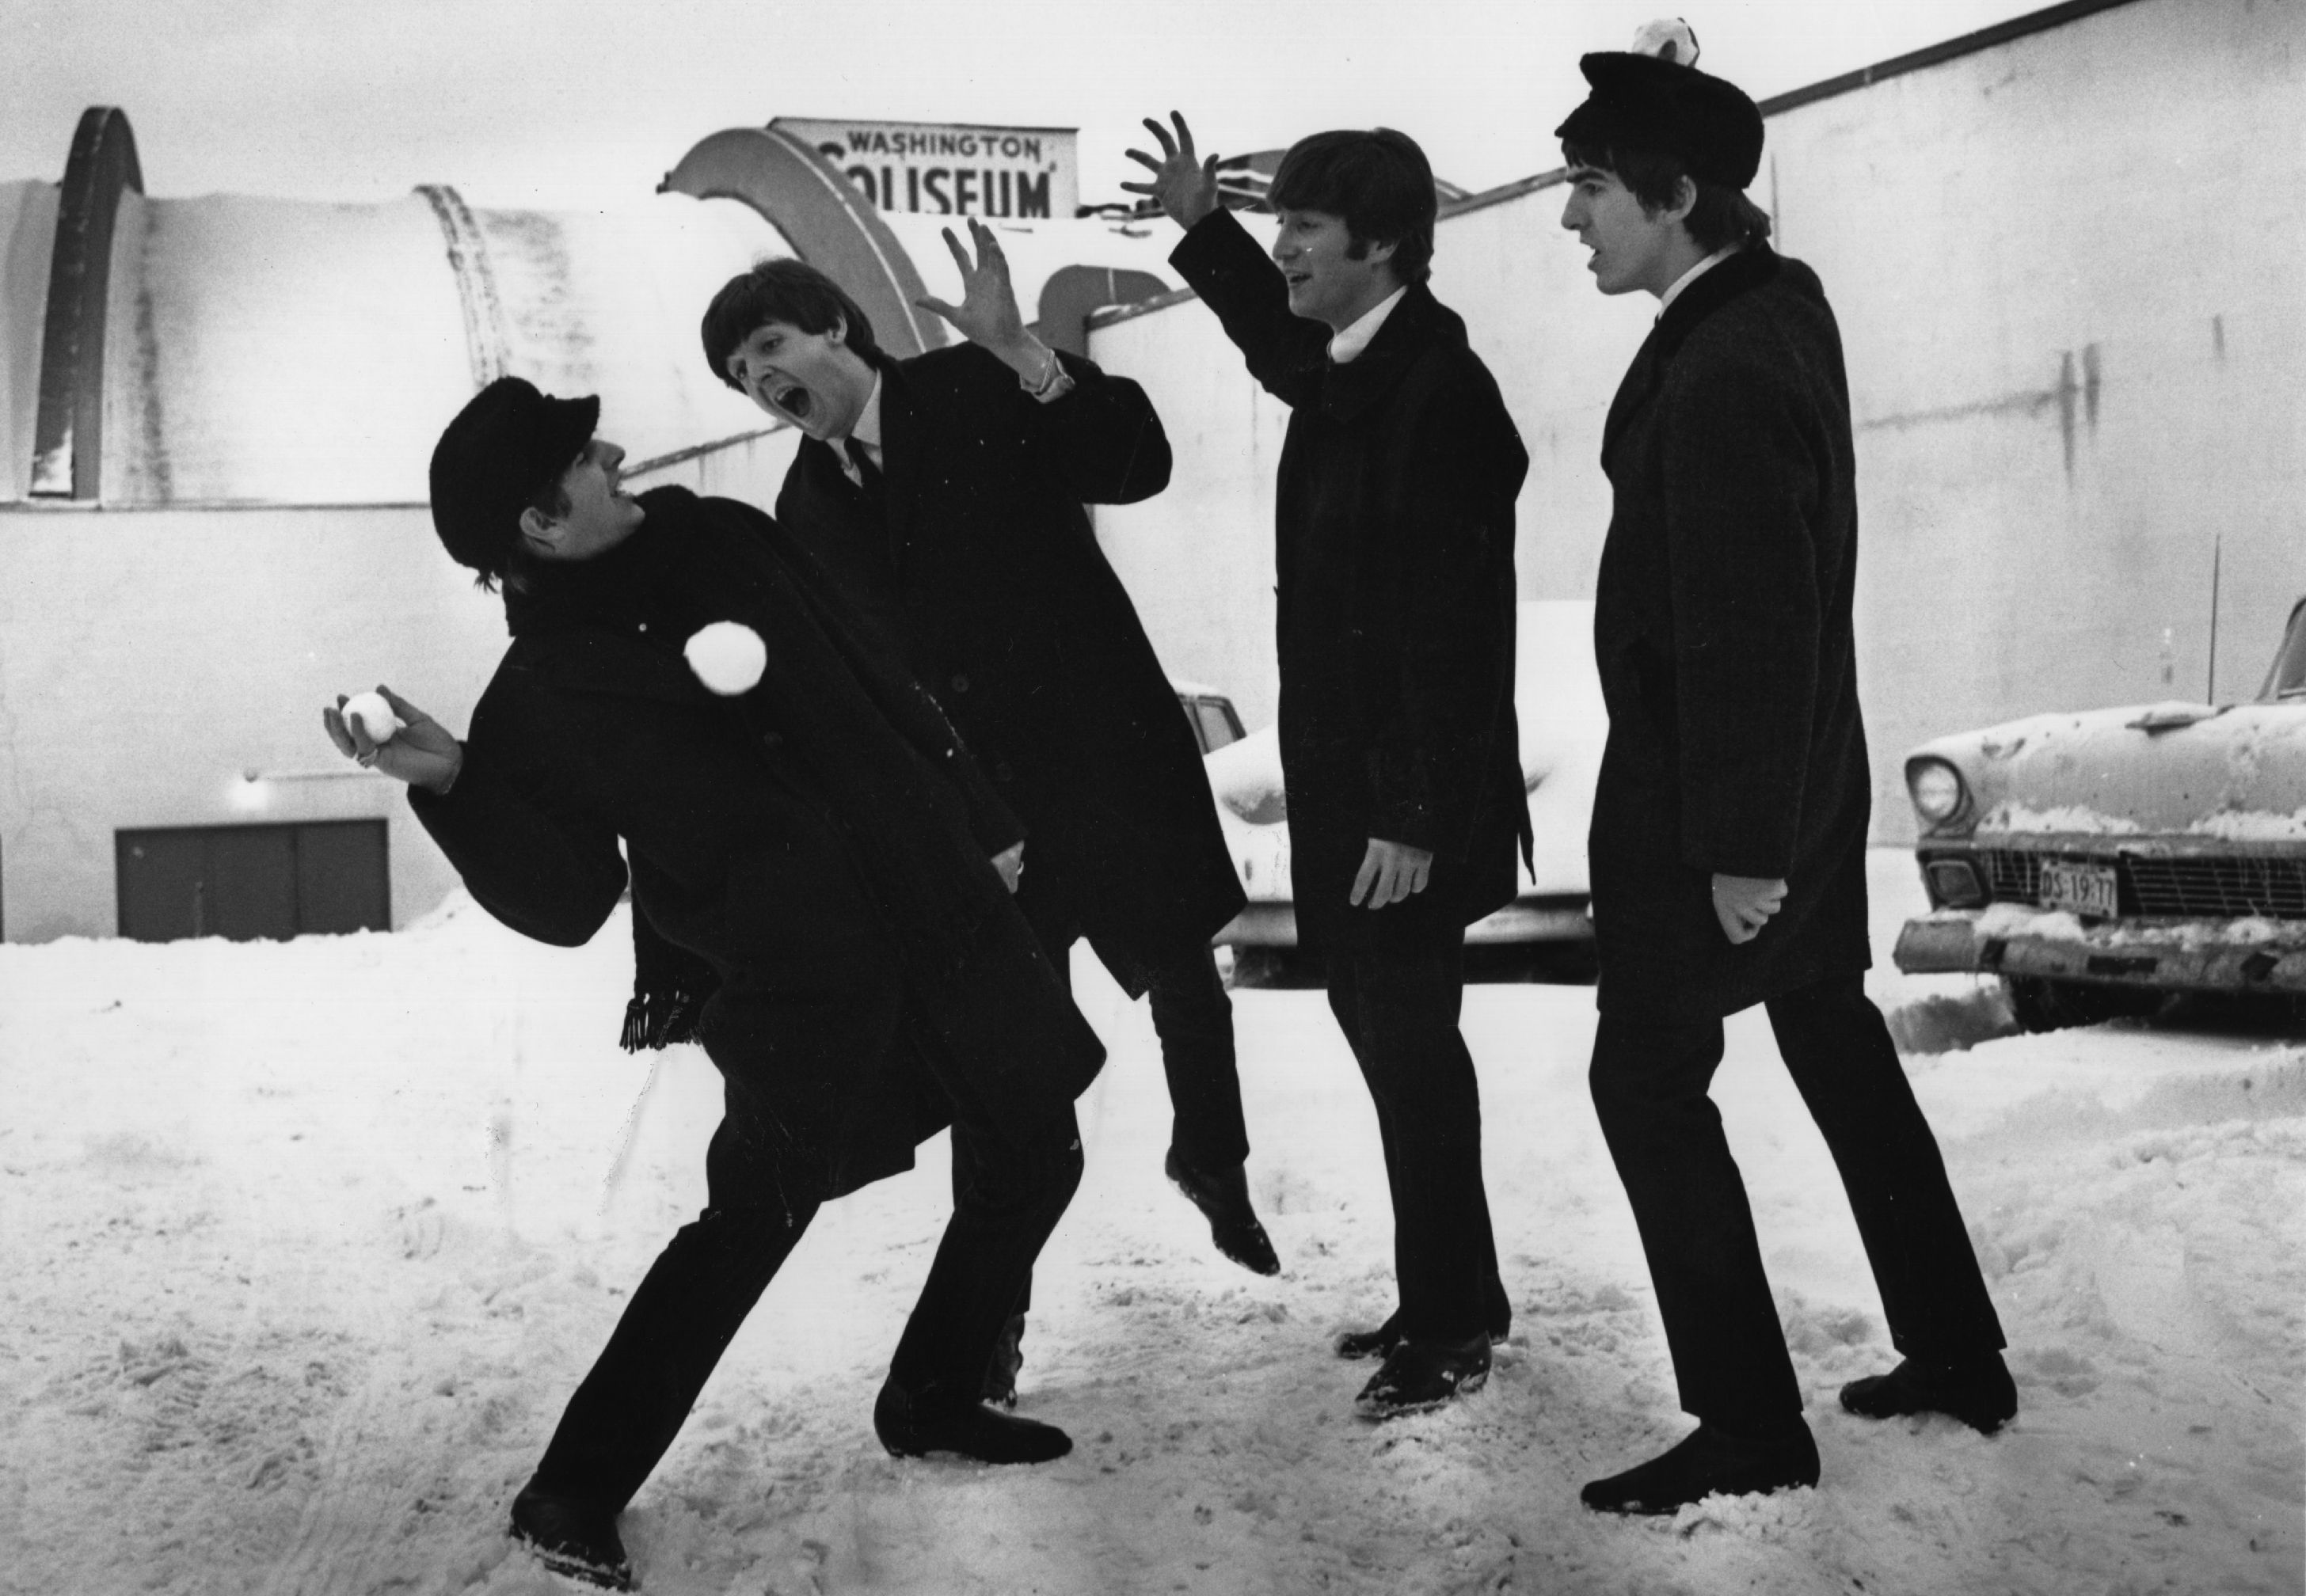 The Beatles have a snowball fight outside of the Coliseum in Washington, USA